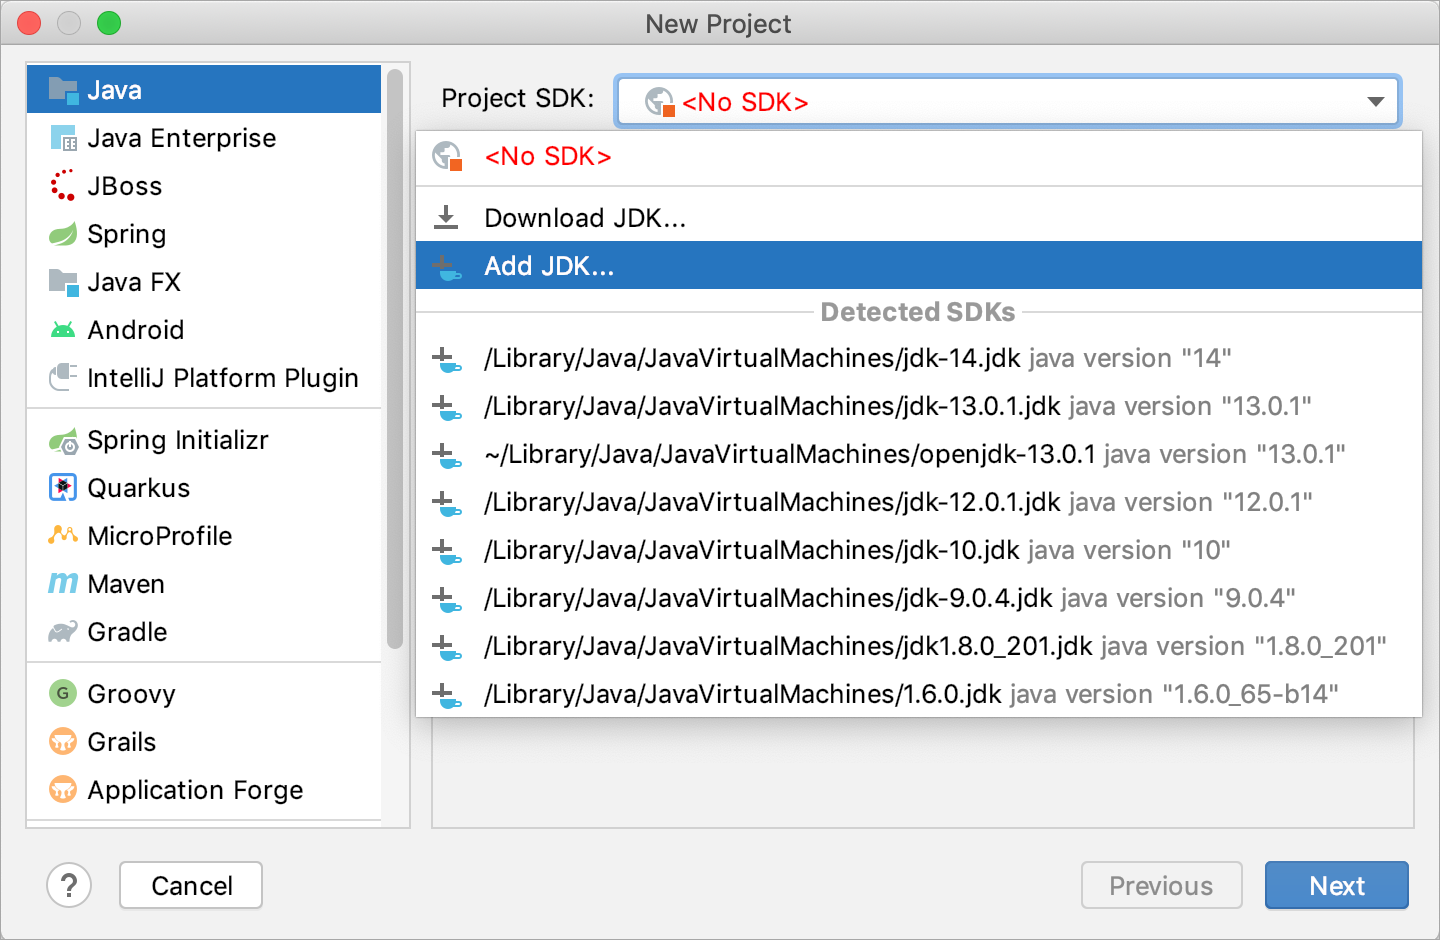 Configuring an SDK for the new project